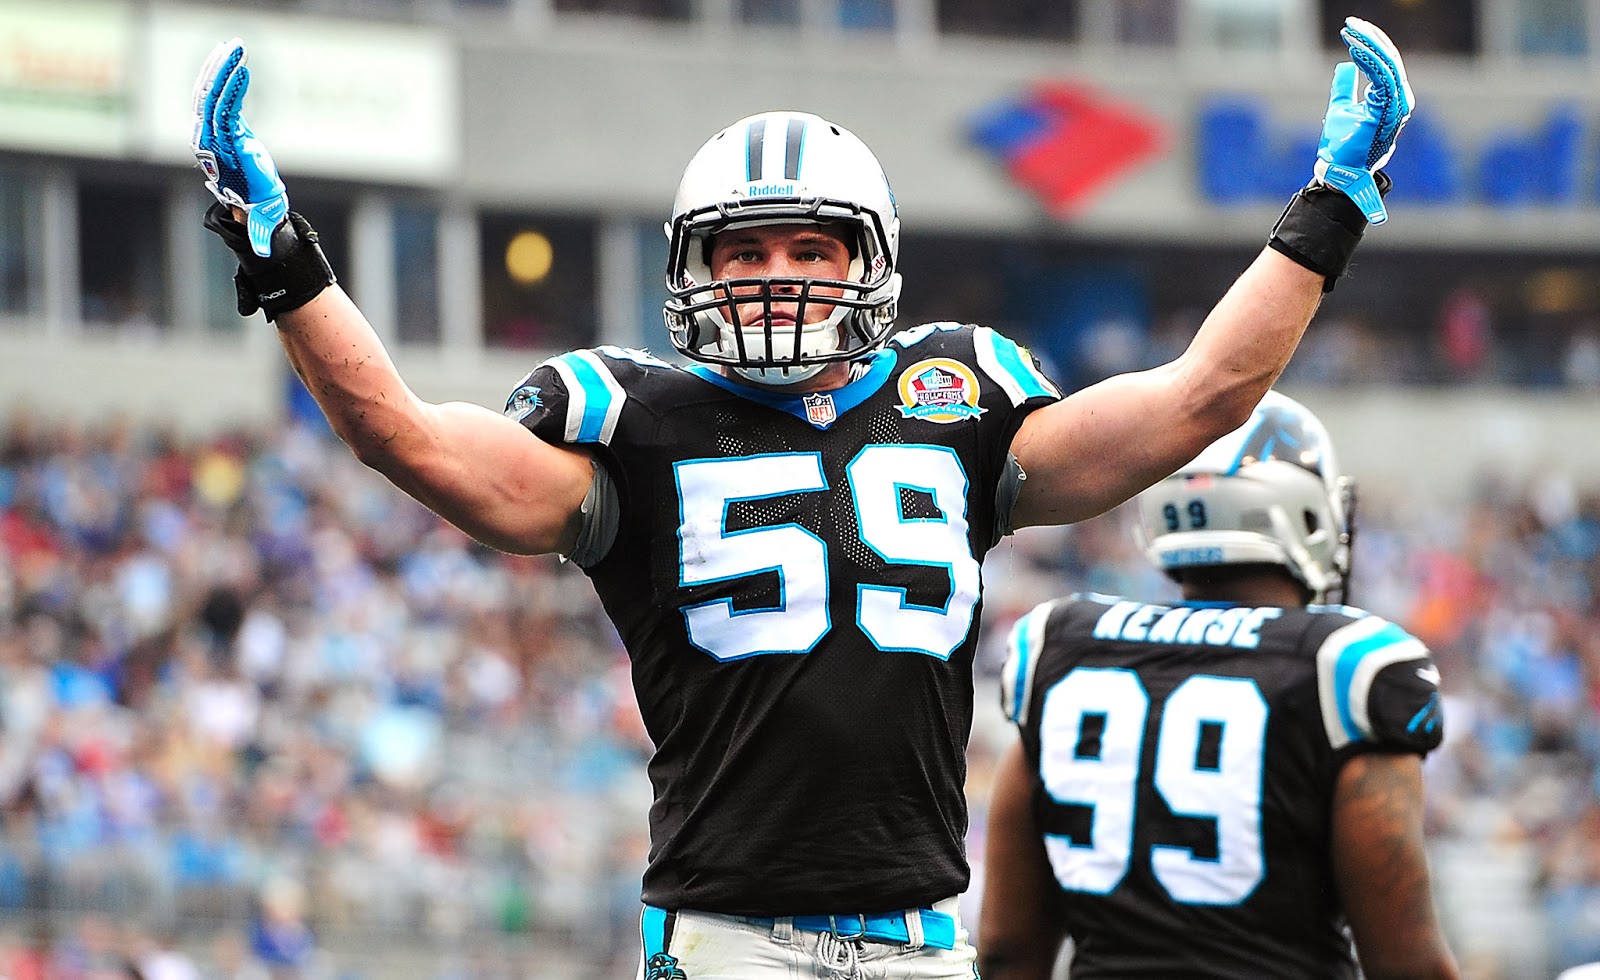 Luke Kuechly And The Carolina Panthers Take On Miami Dolphins In